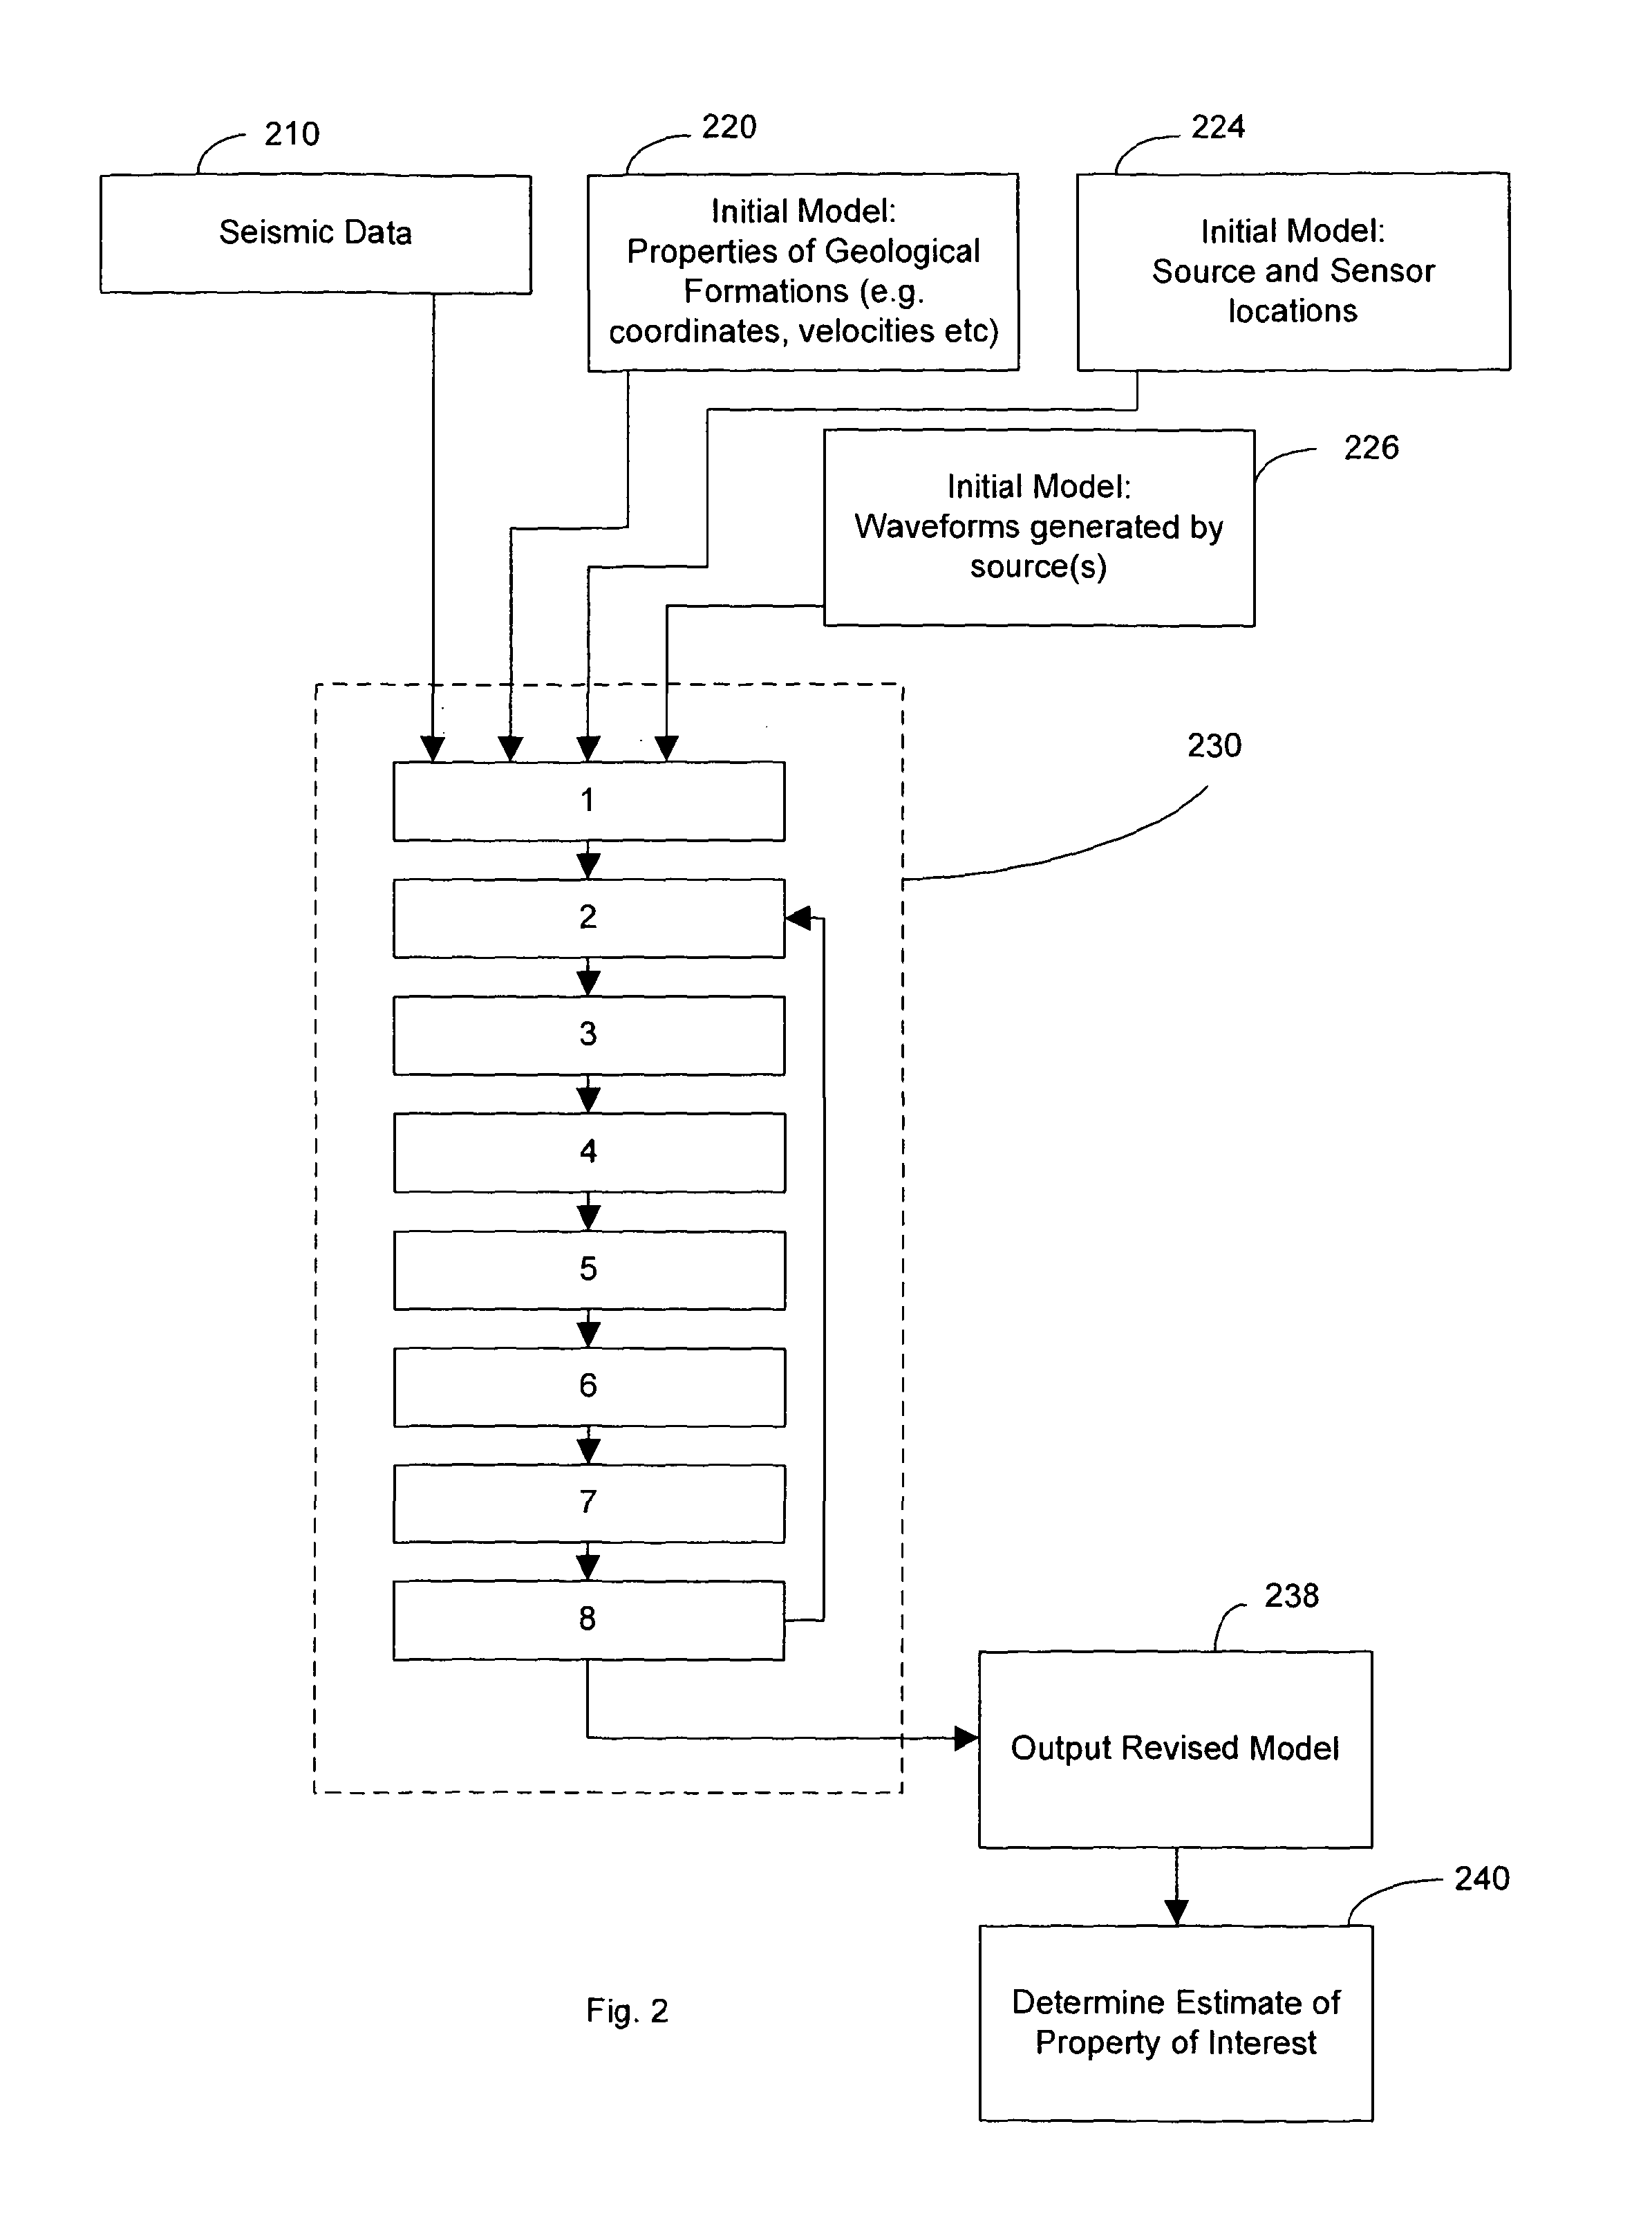 Method to aid in the exploration, mine design, evaluation and/or extraction of metalliferous mineral and/or diamond deposits